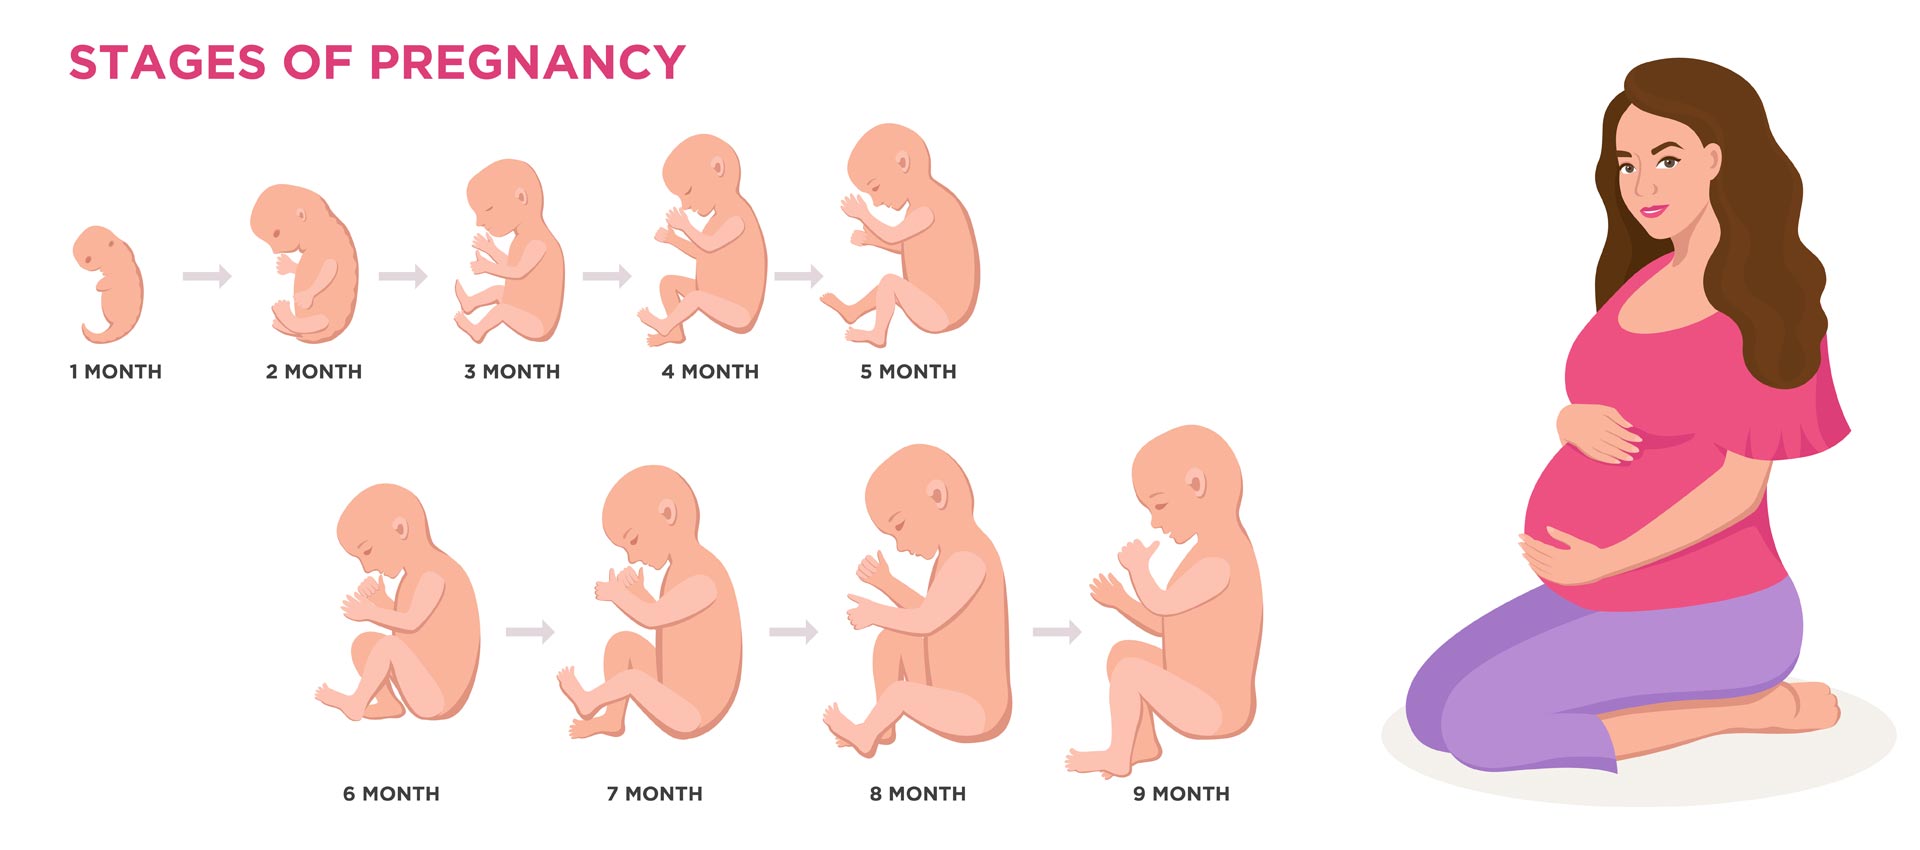 Baby Development Stages 6-12 Months: What to Expect?